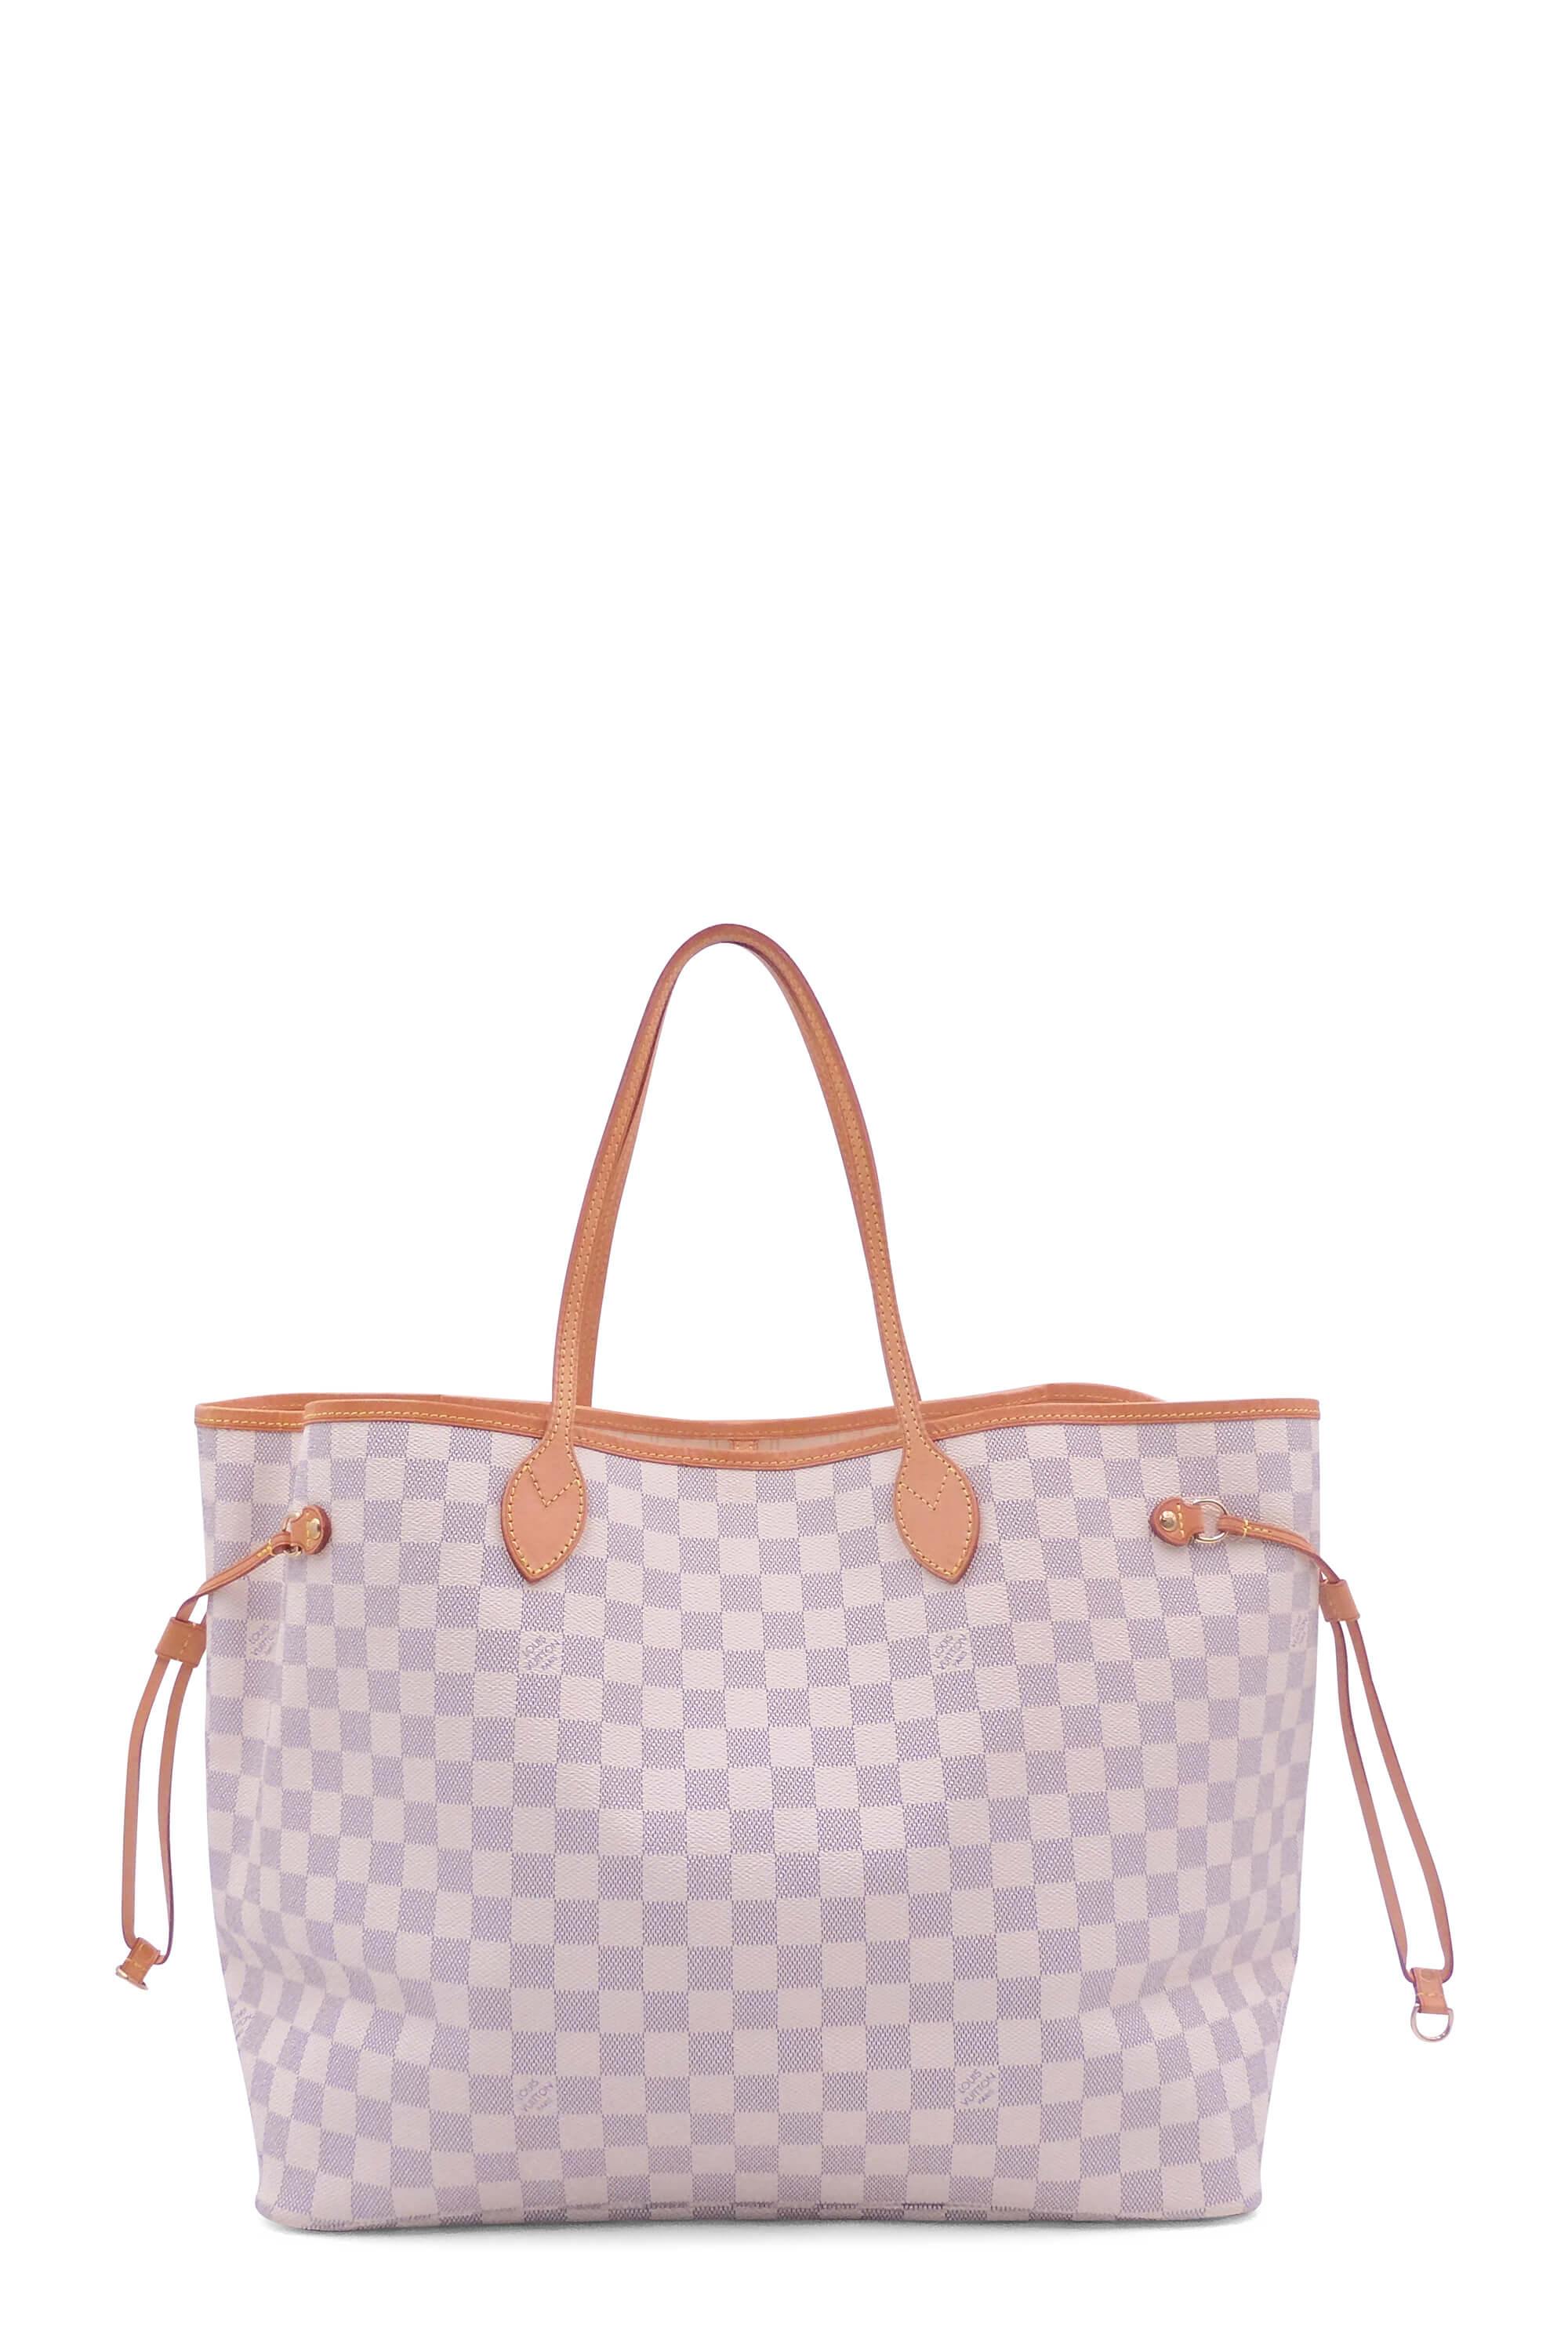 Buy Authentic, Preloved Louis Vuitton Neverfull Damier Azur GM